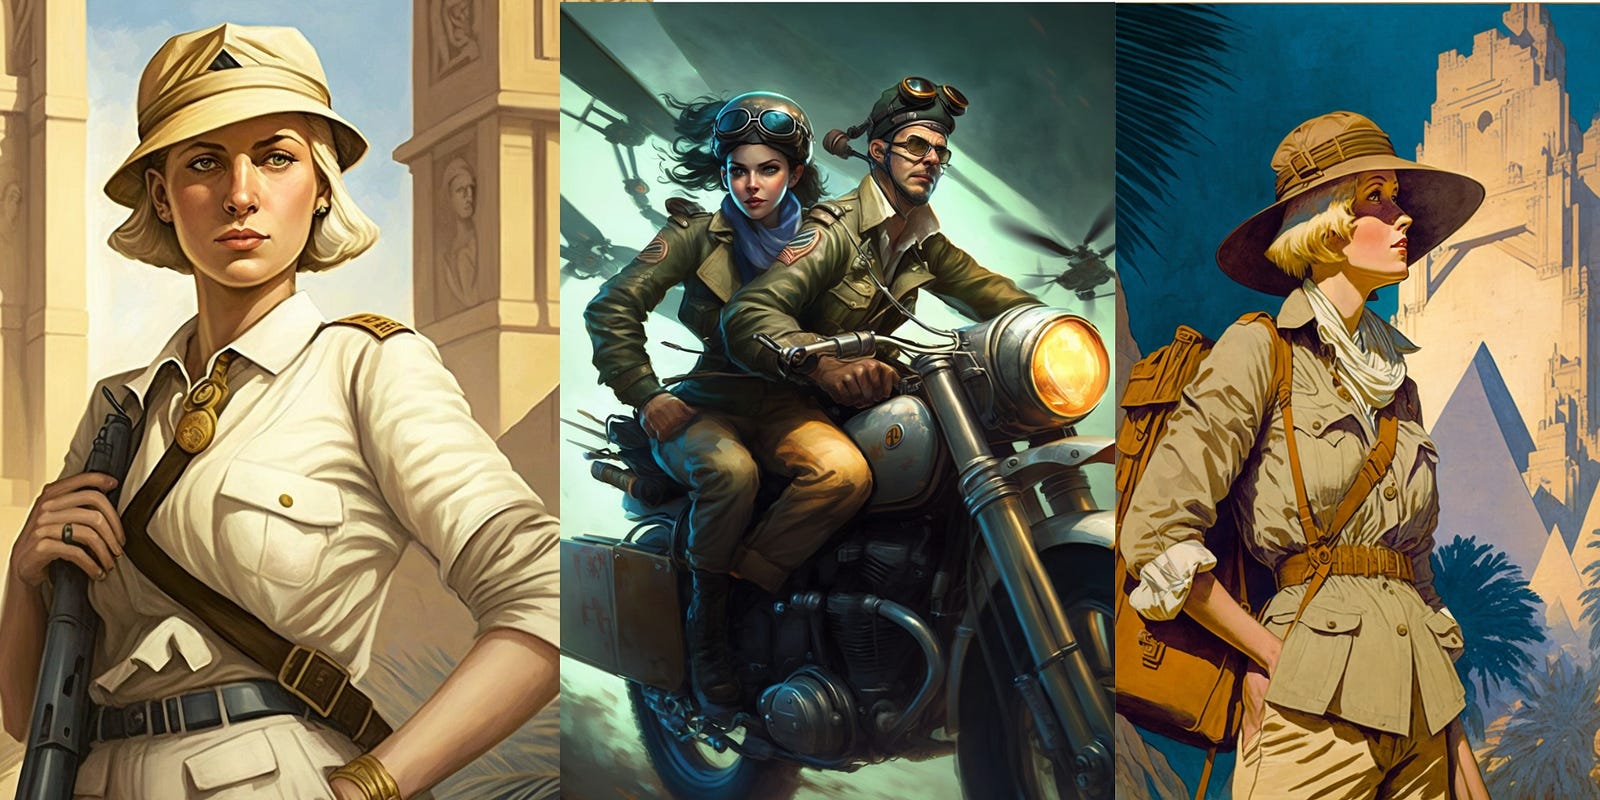 images of a 1930s female explorer like Indiana Jones, images created with Midjourney